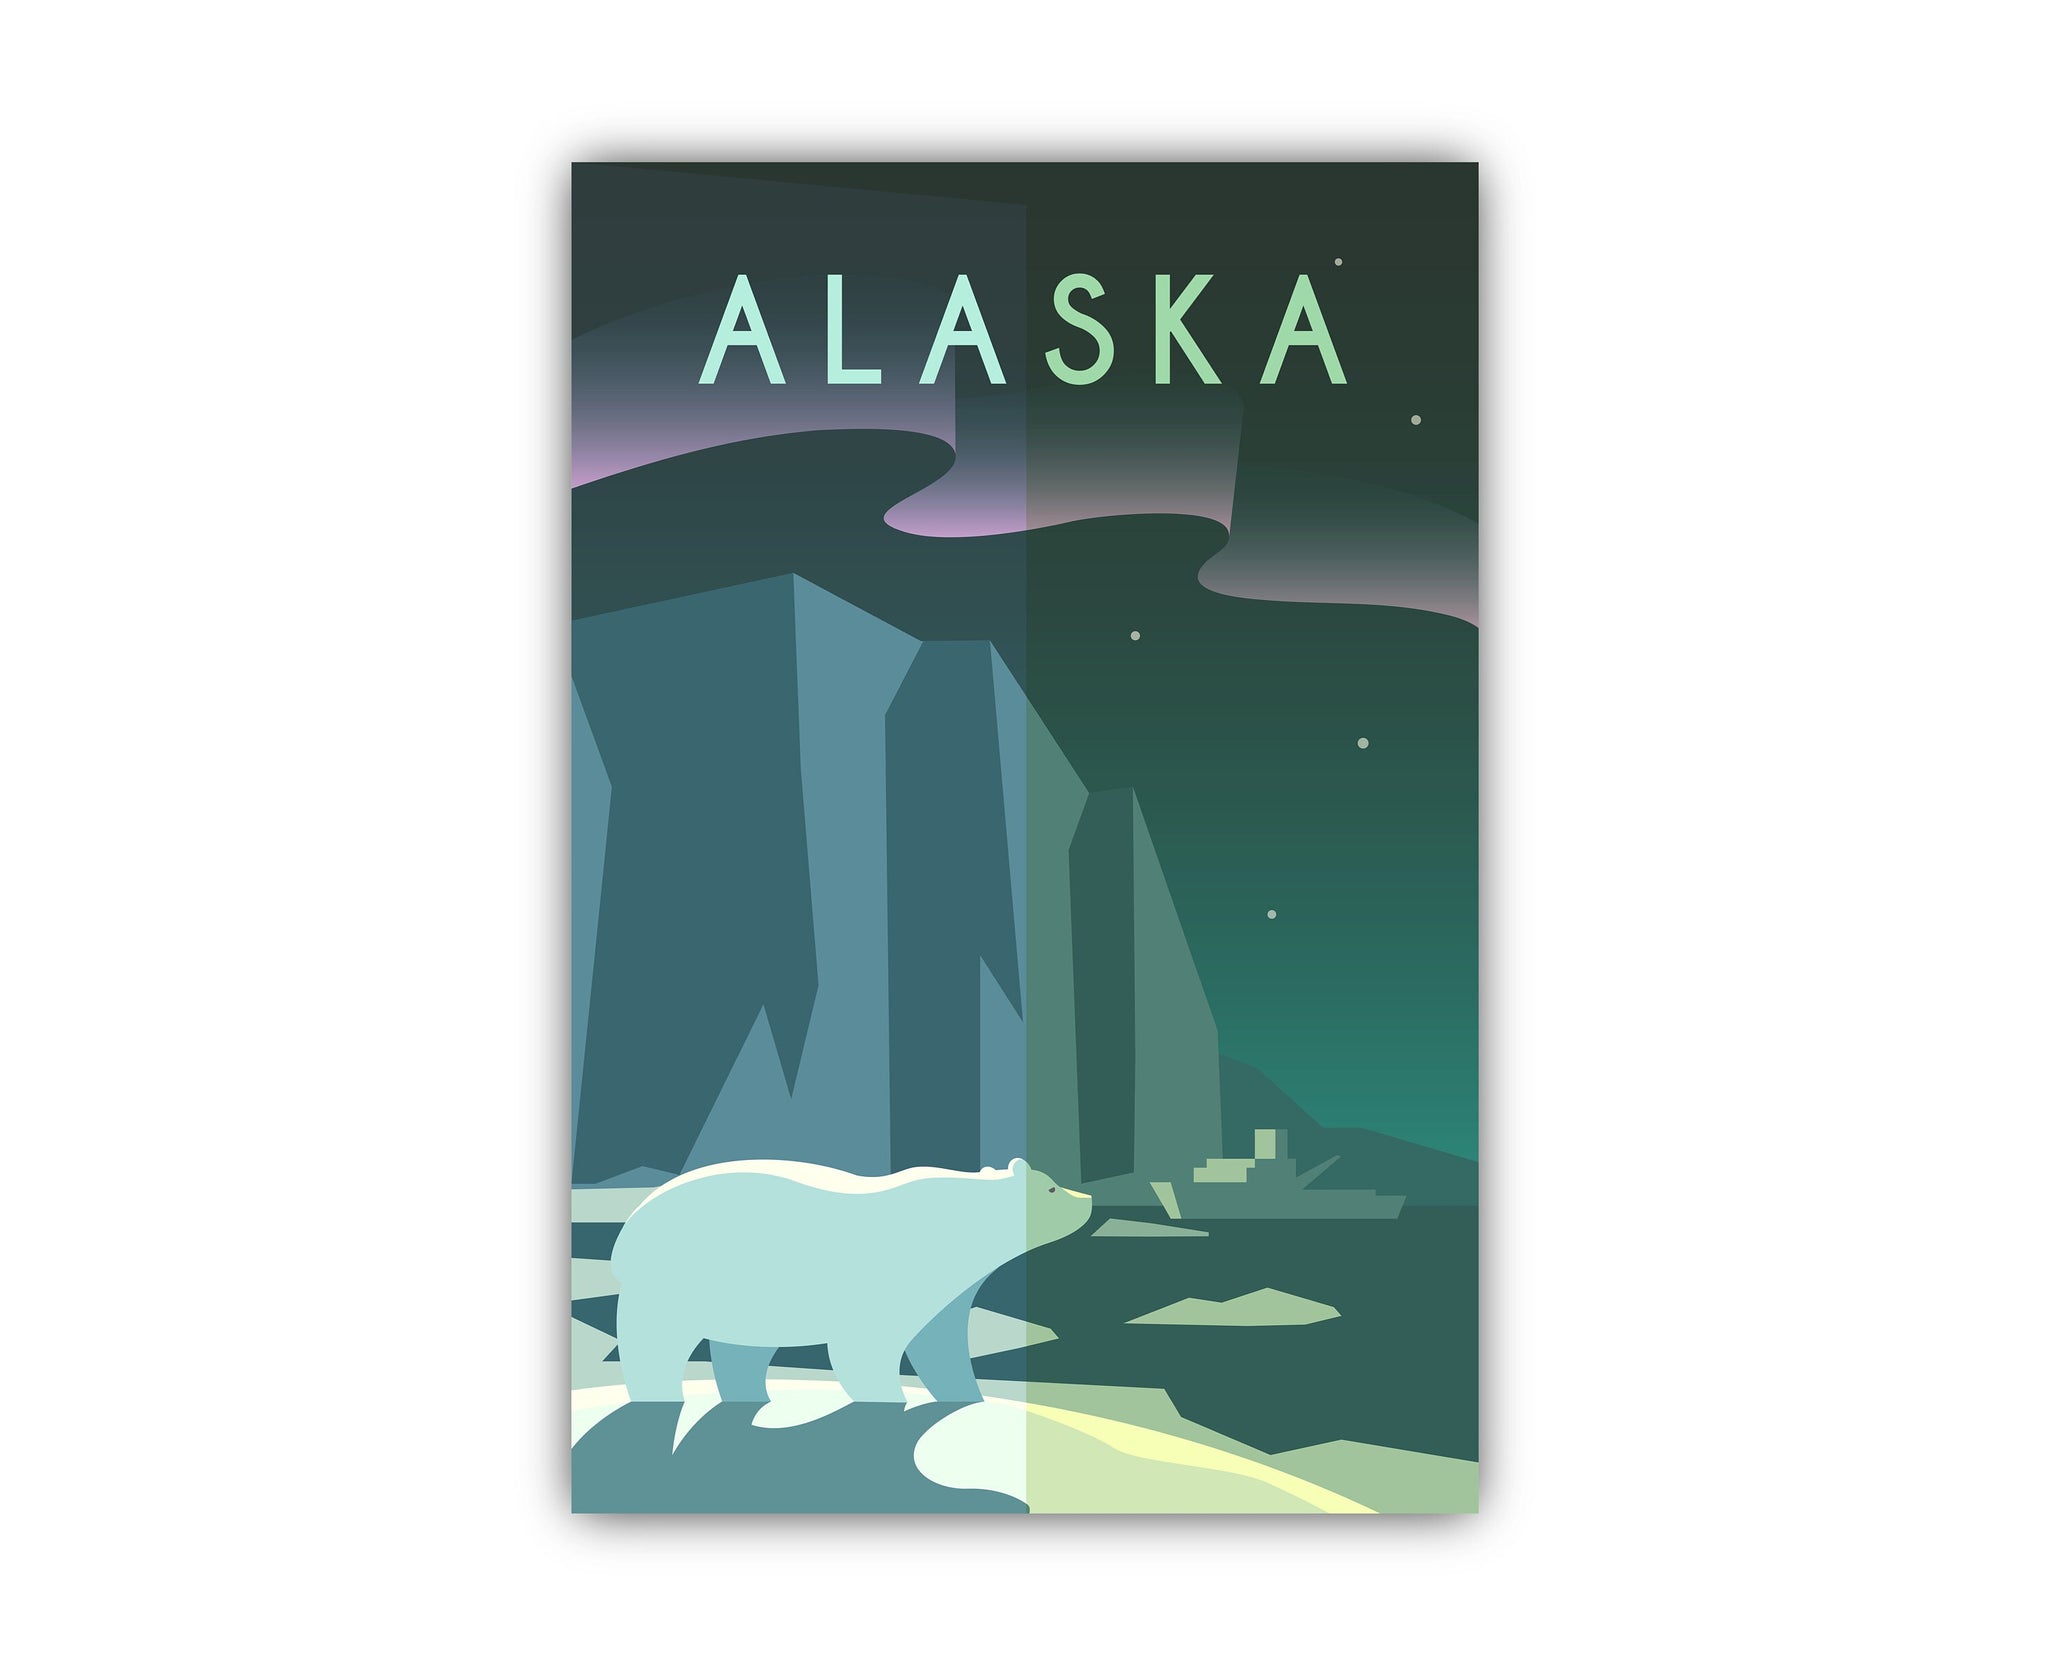 Retro Style Travel Poster, Alaska Vintage Rustic Poster Print, Home Wall Art, Office Wall Decors, Posters, California, City Travel Poster